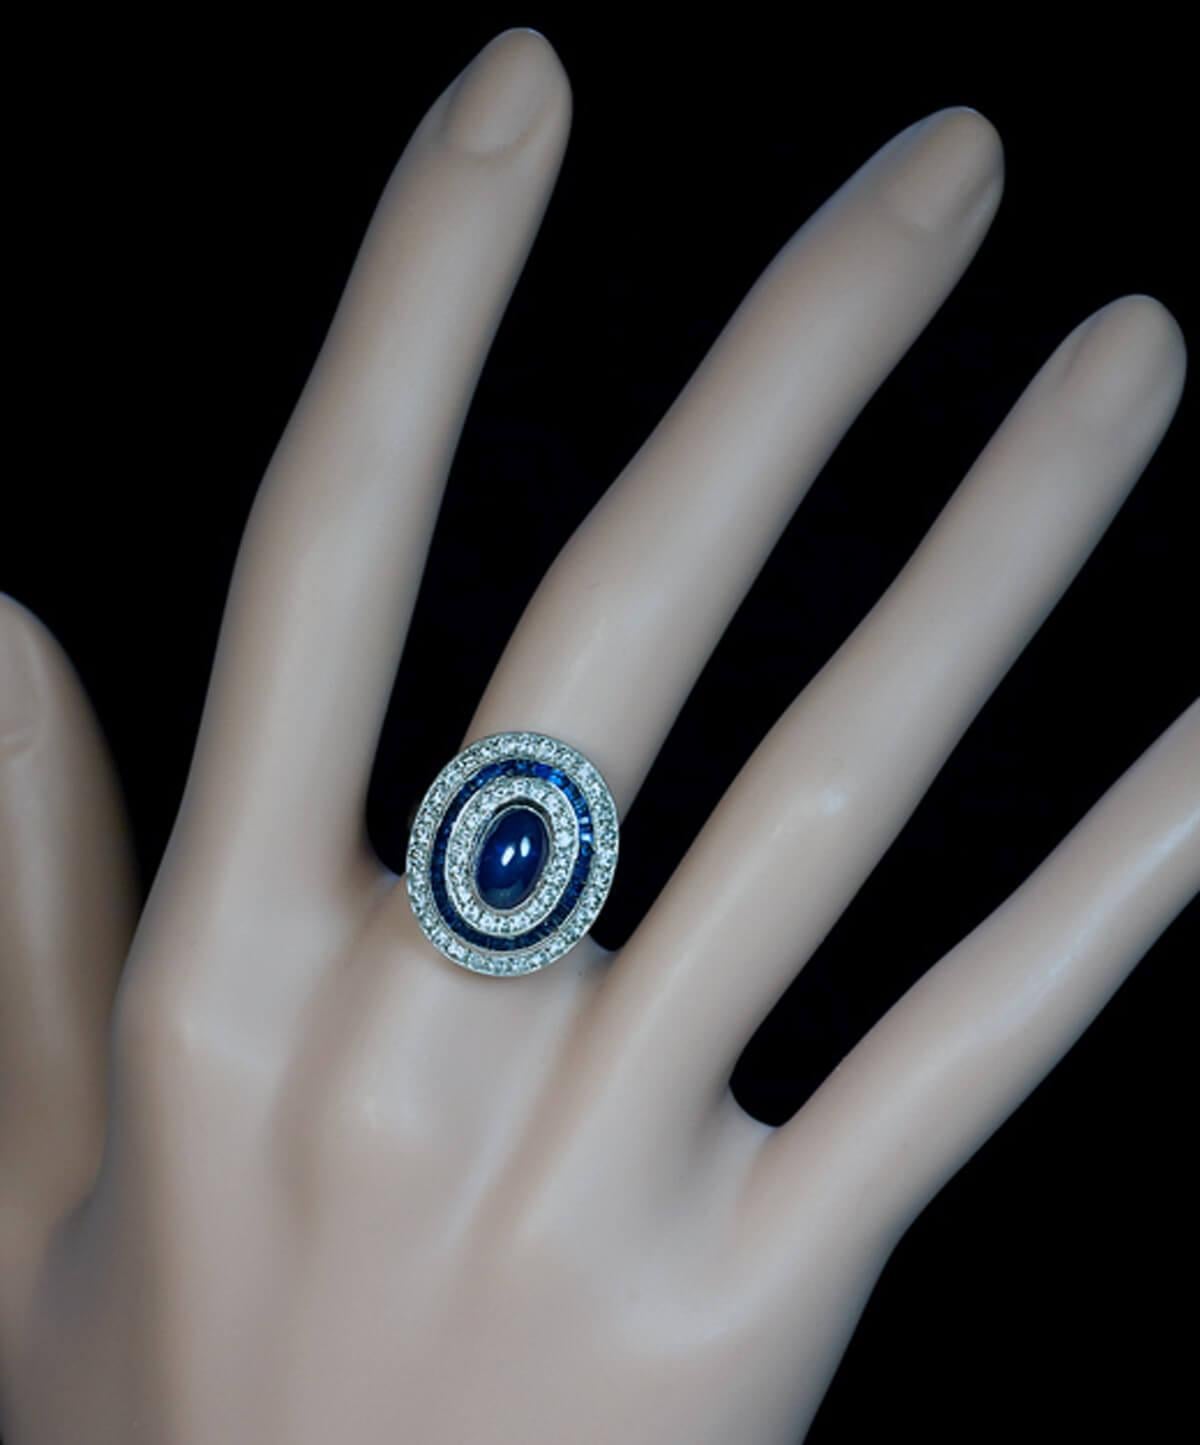 Belgium, 1940s  The ring is handcrafted in 18K white gold. It is centered with a cabochon cut blue sapphire encircled by two rows of diamonds (about 1 carat total weight) and a row of channel-set French cut sapphires.  The cabochon sapphire measures